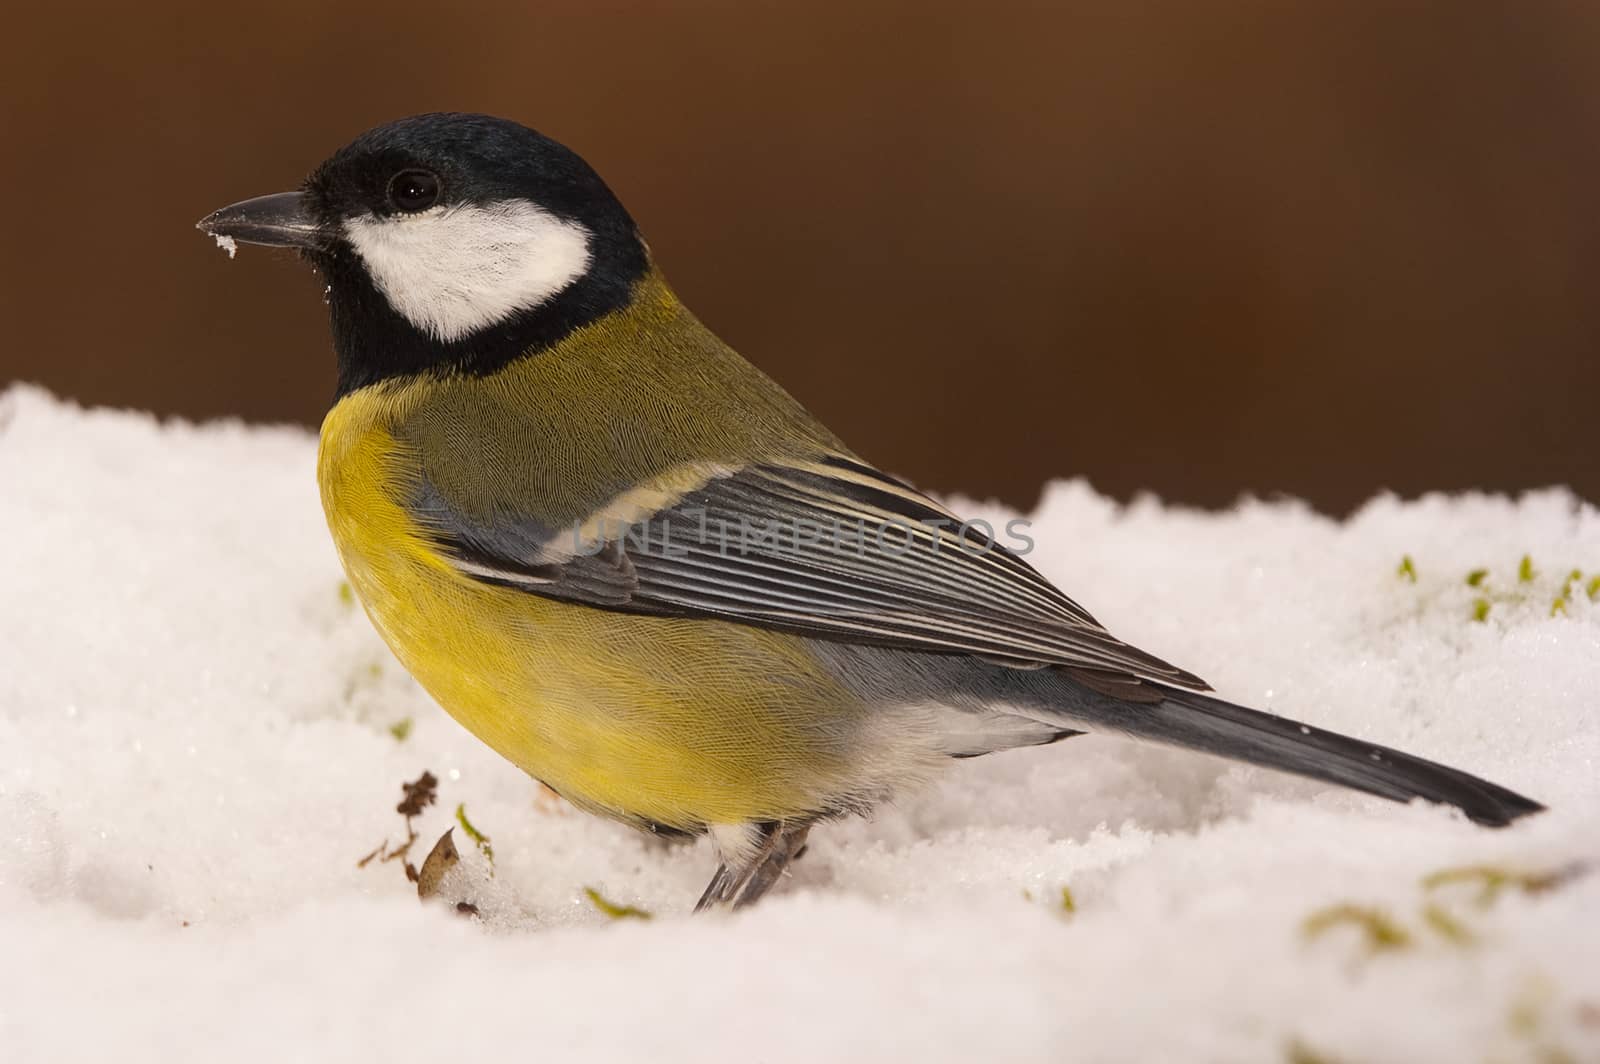 Great tit (Parus major). Garden bird, looking for food in the sn by jalonsohu@gmail.com